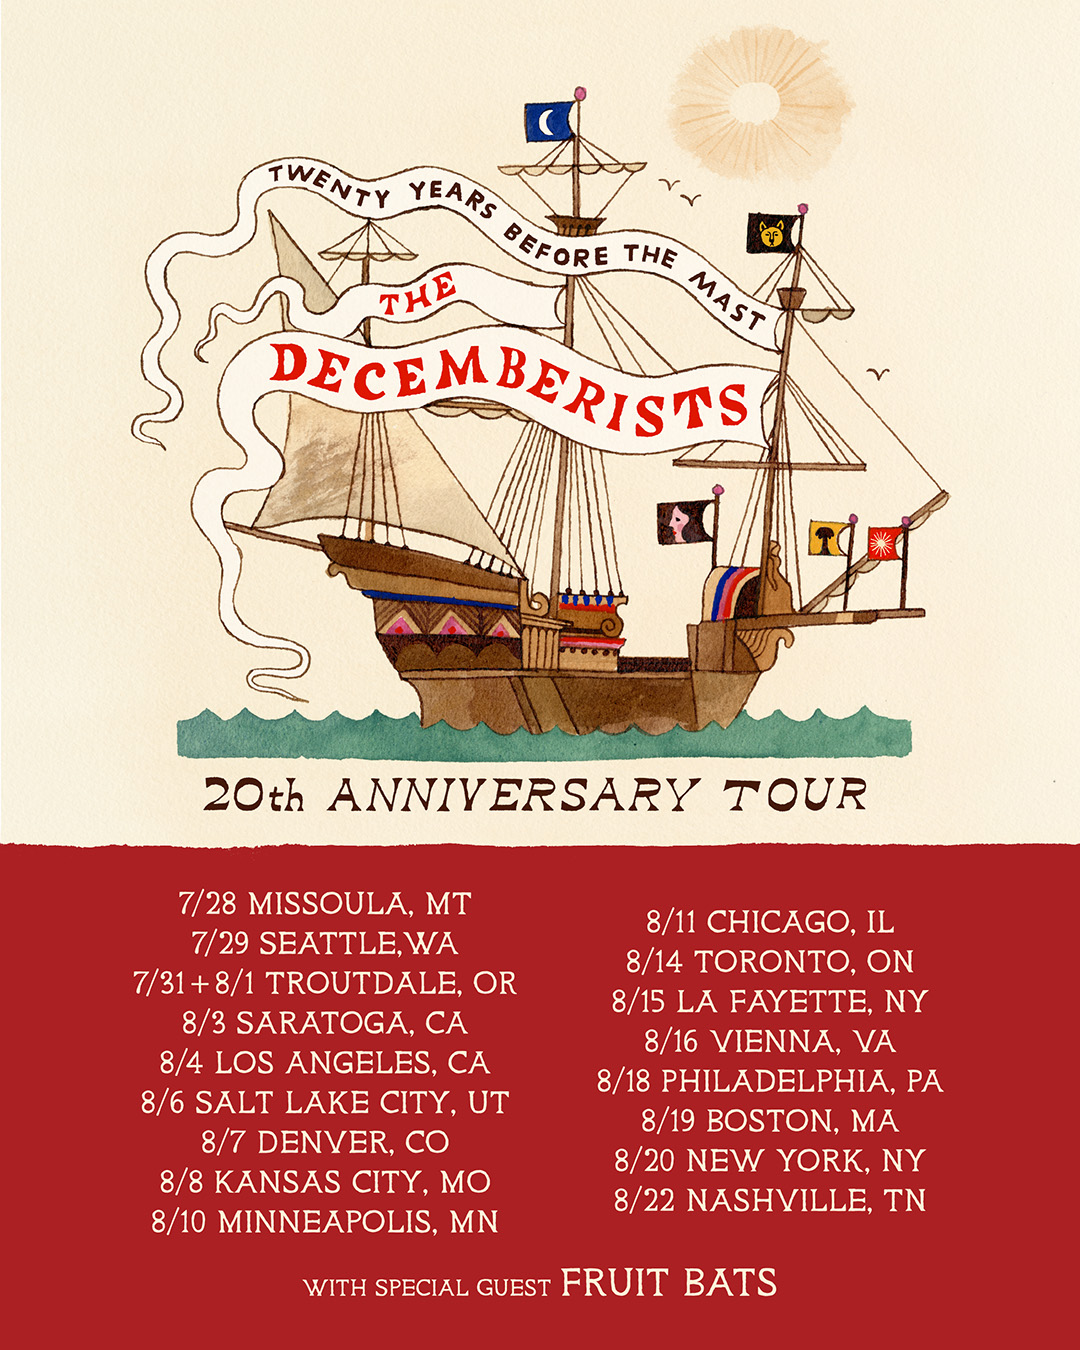 The Decemberists 20th anniversary tour poster